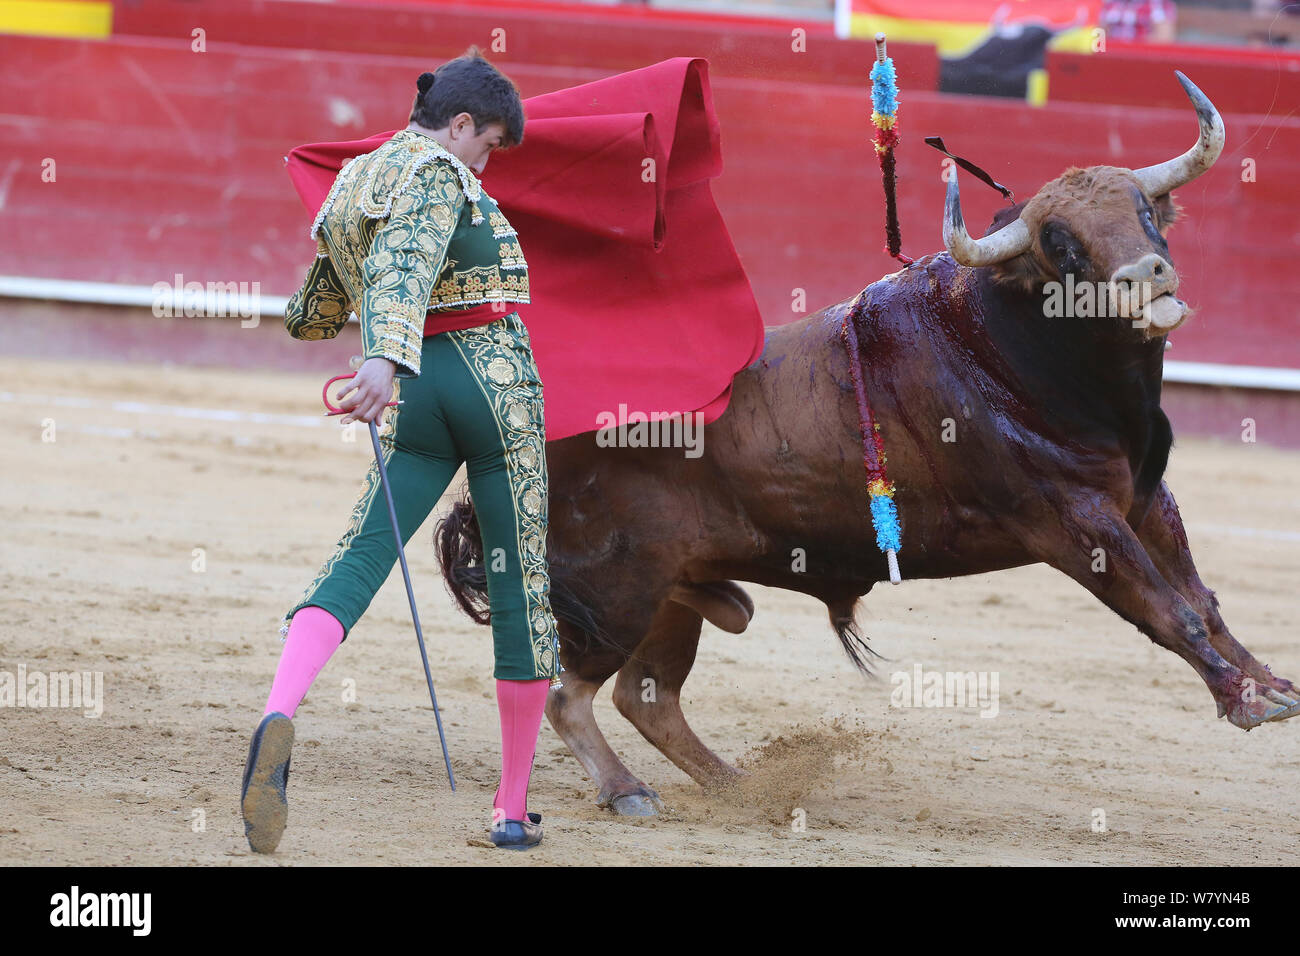 Matador Waving Red Cape At Bull During Bullfight Bull Is Speared With Barbed Sticks Banderillas Plaza De Toros Valencia Spain July 14 Stock Photo Alamy